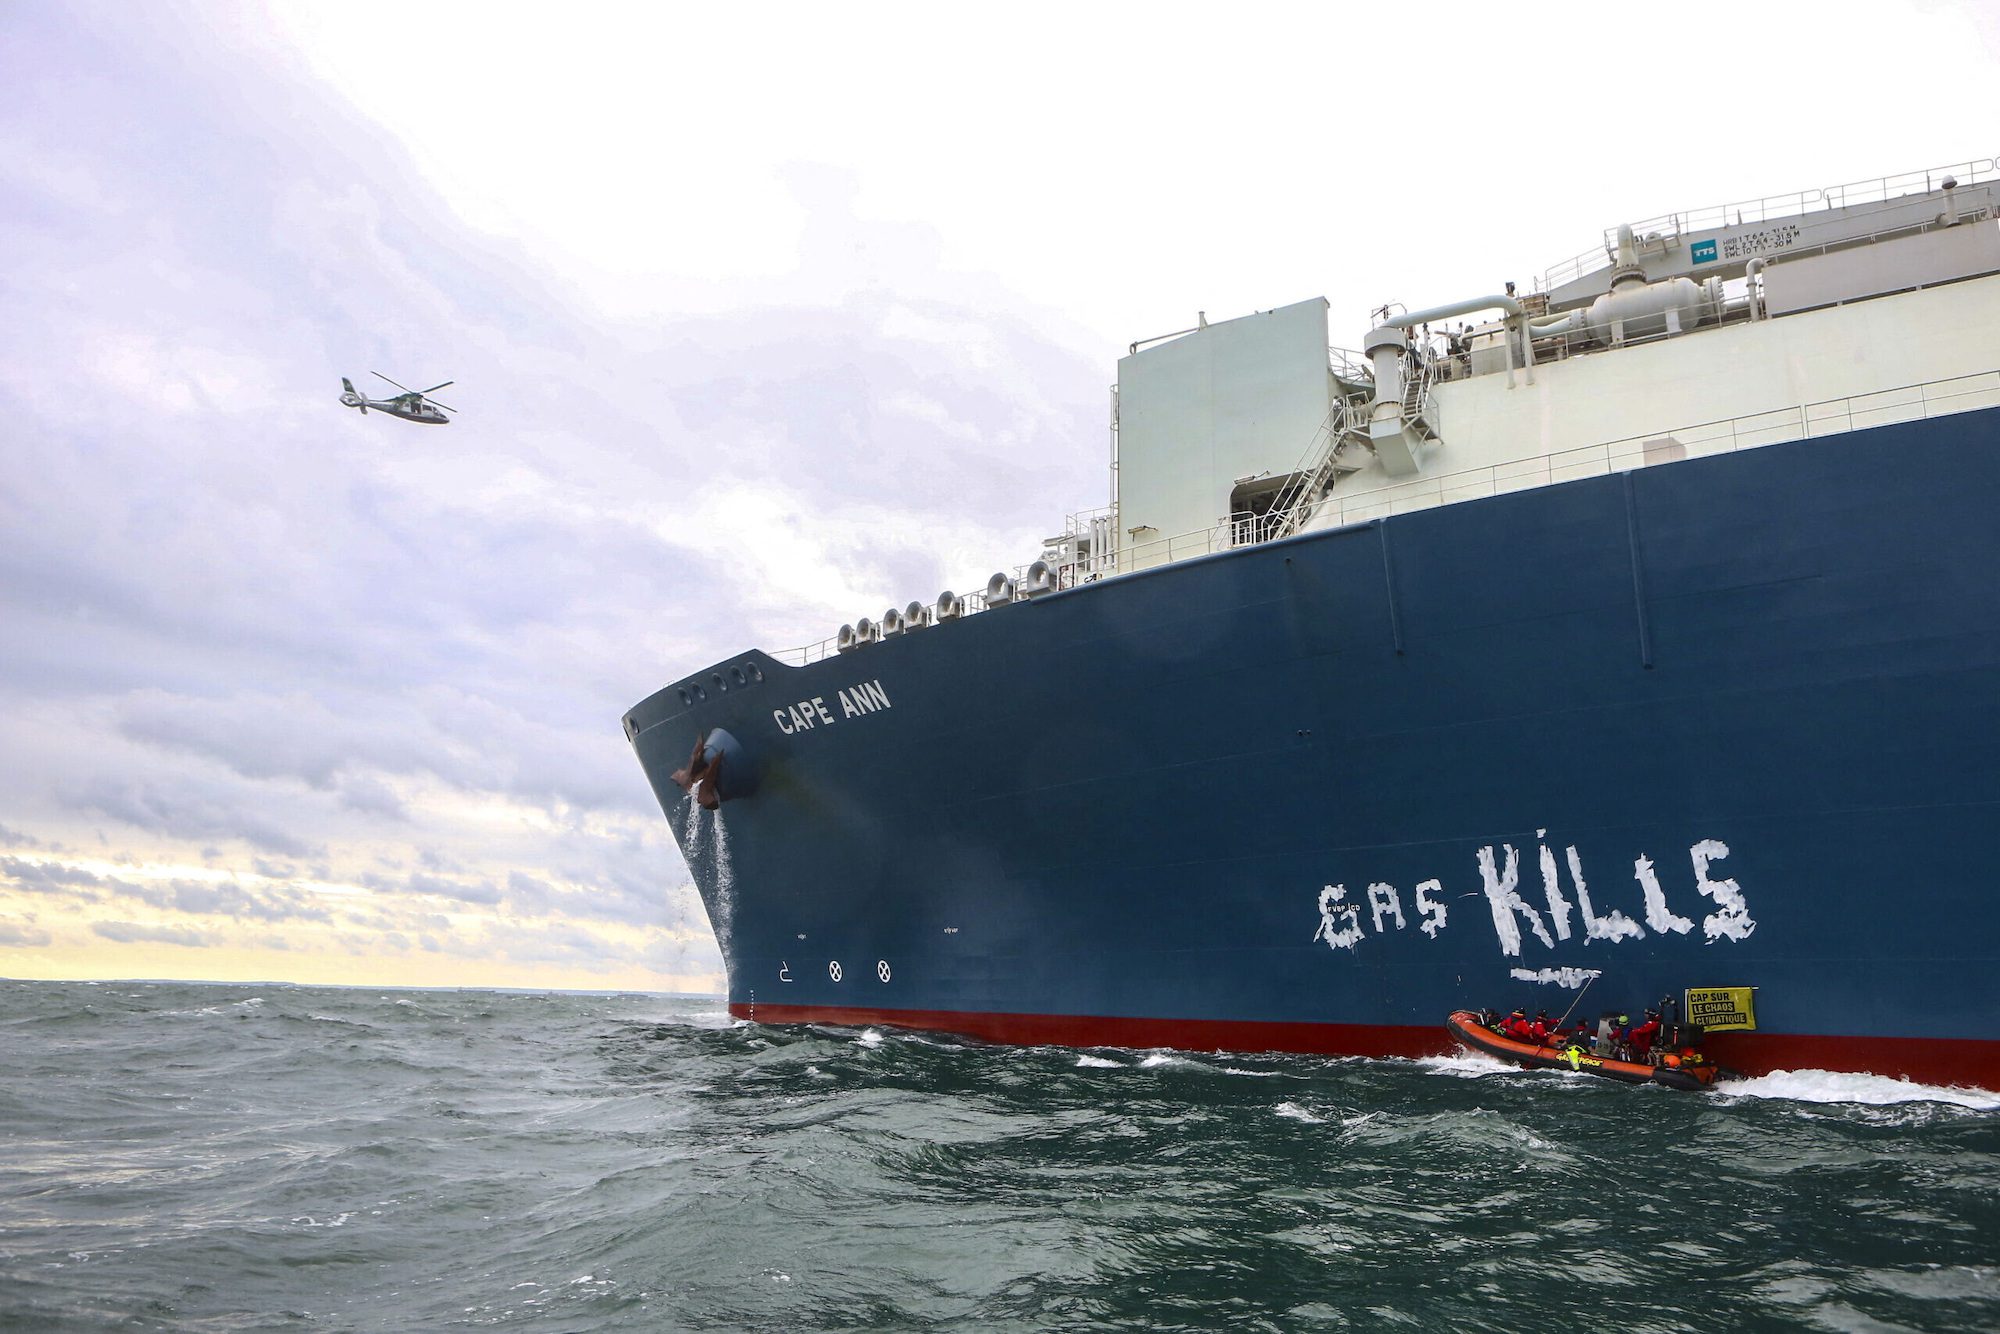 Greenpeace environmental activists on kayaks write "gas kills" on a LNG processing terminal set to be operated by Total Energies in Le Havre port, France, September 18, 2023. Jean Nicholas Guillo / Greenpeace /Handout via REUTERS